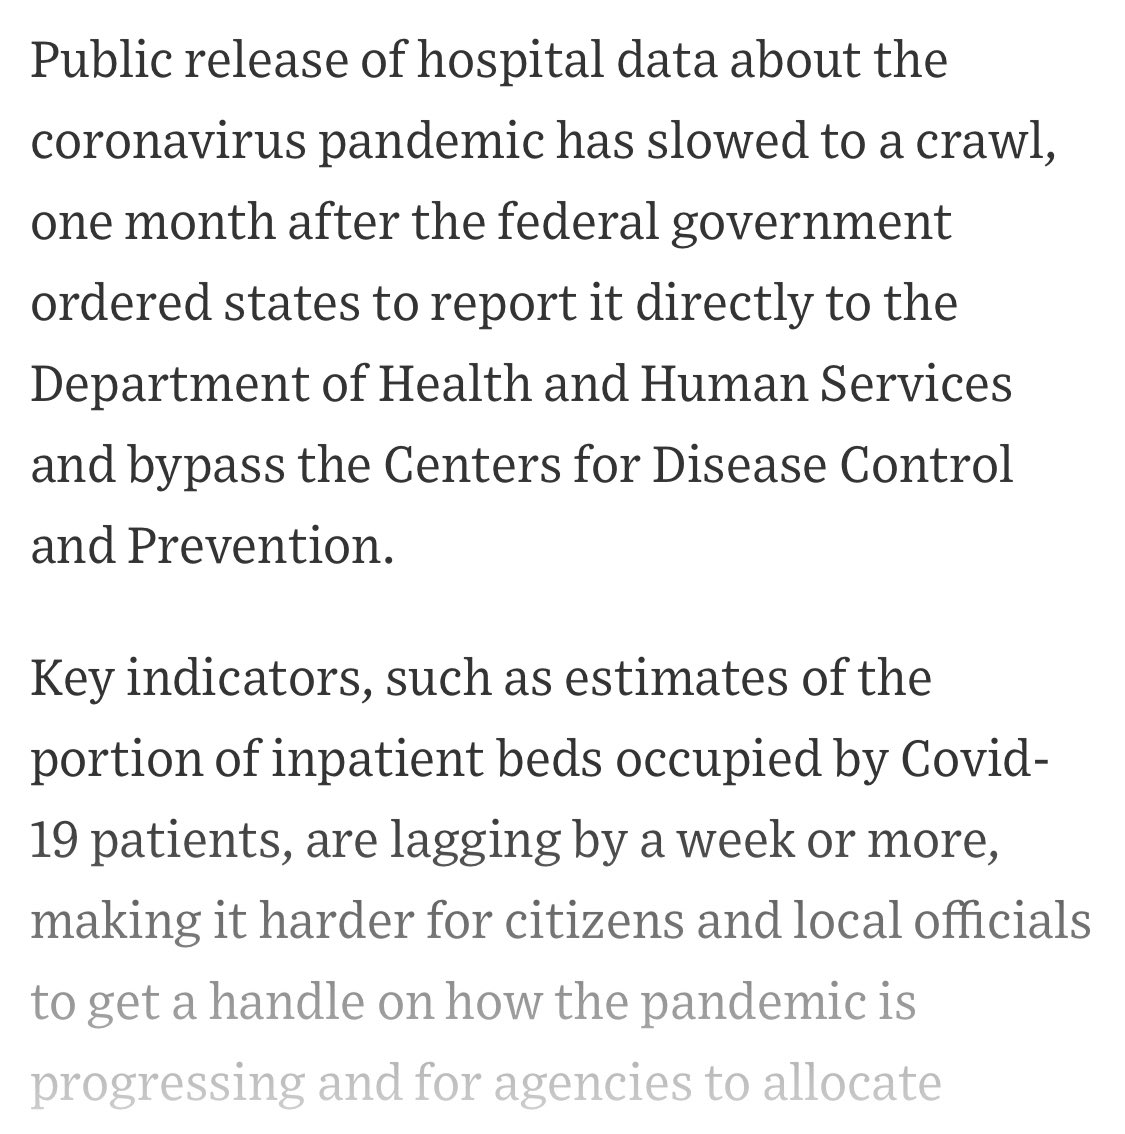 Next example is under the cover of darkness, HHS cut off CDC from releasing hospital data. People were suspicious but they made clear they had a better system. That system is a week behind and can’t get it right. At least we’re paying a hand picked vendor! 7/